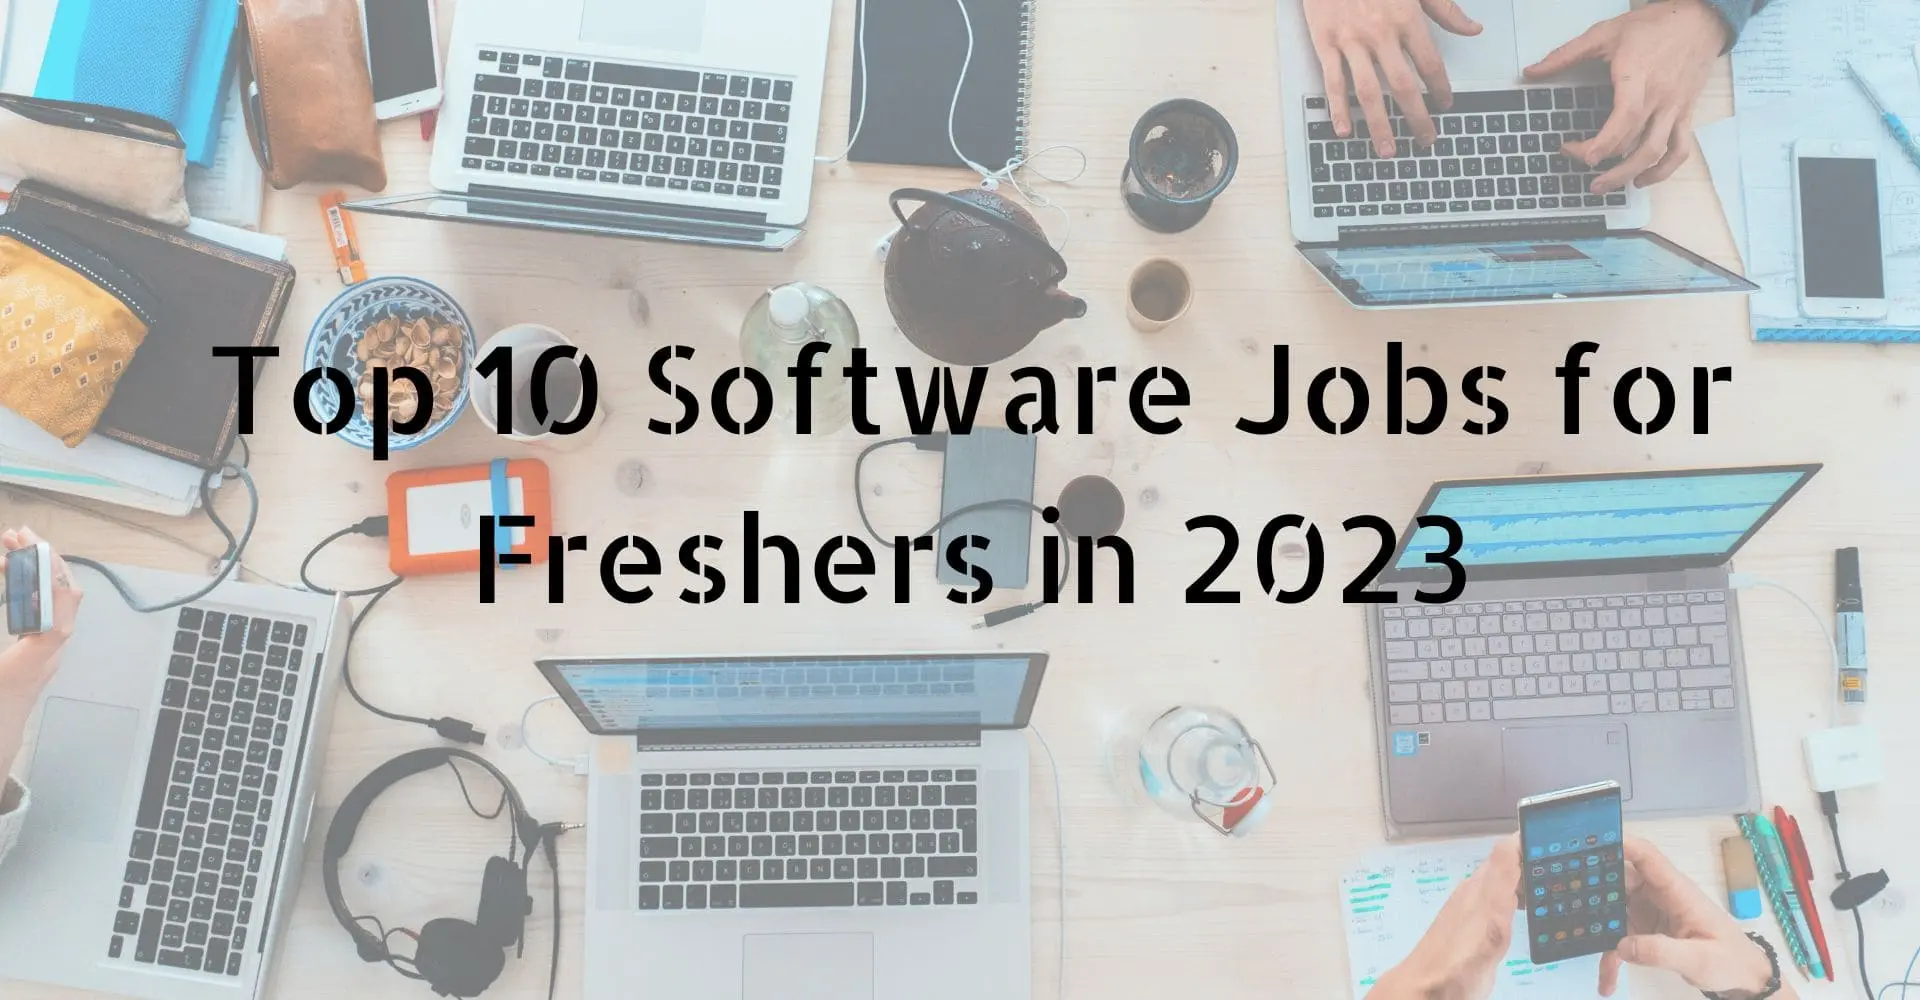 Top 10 Software Jobs for Freshers in 2023